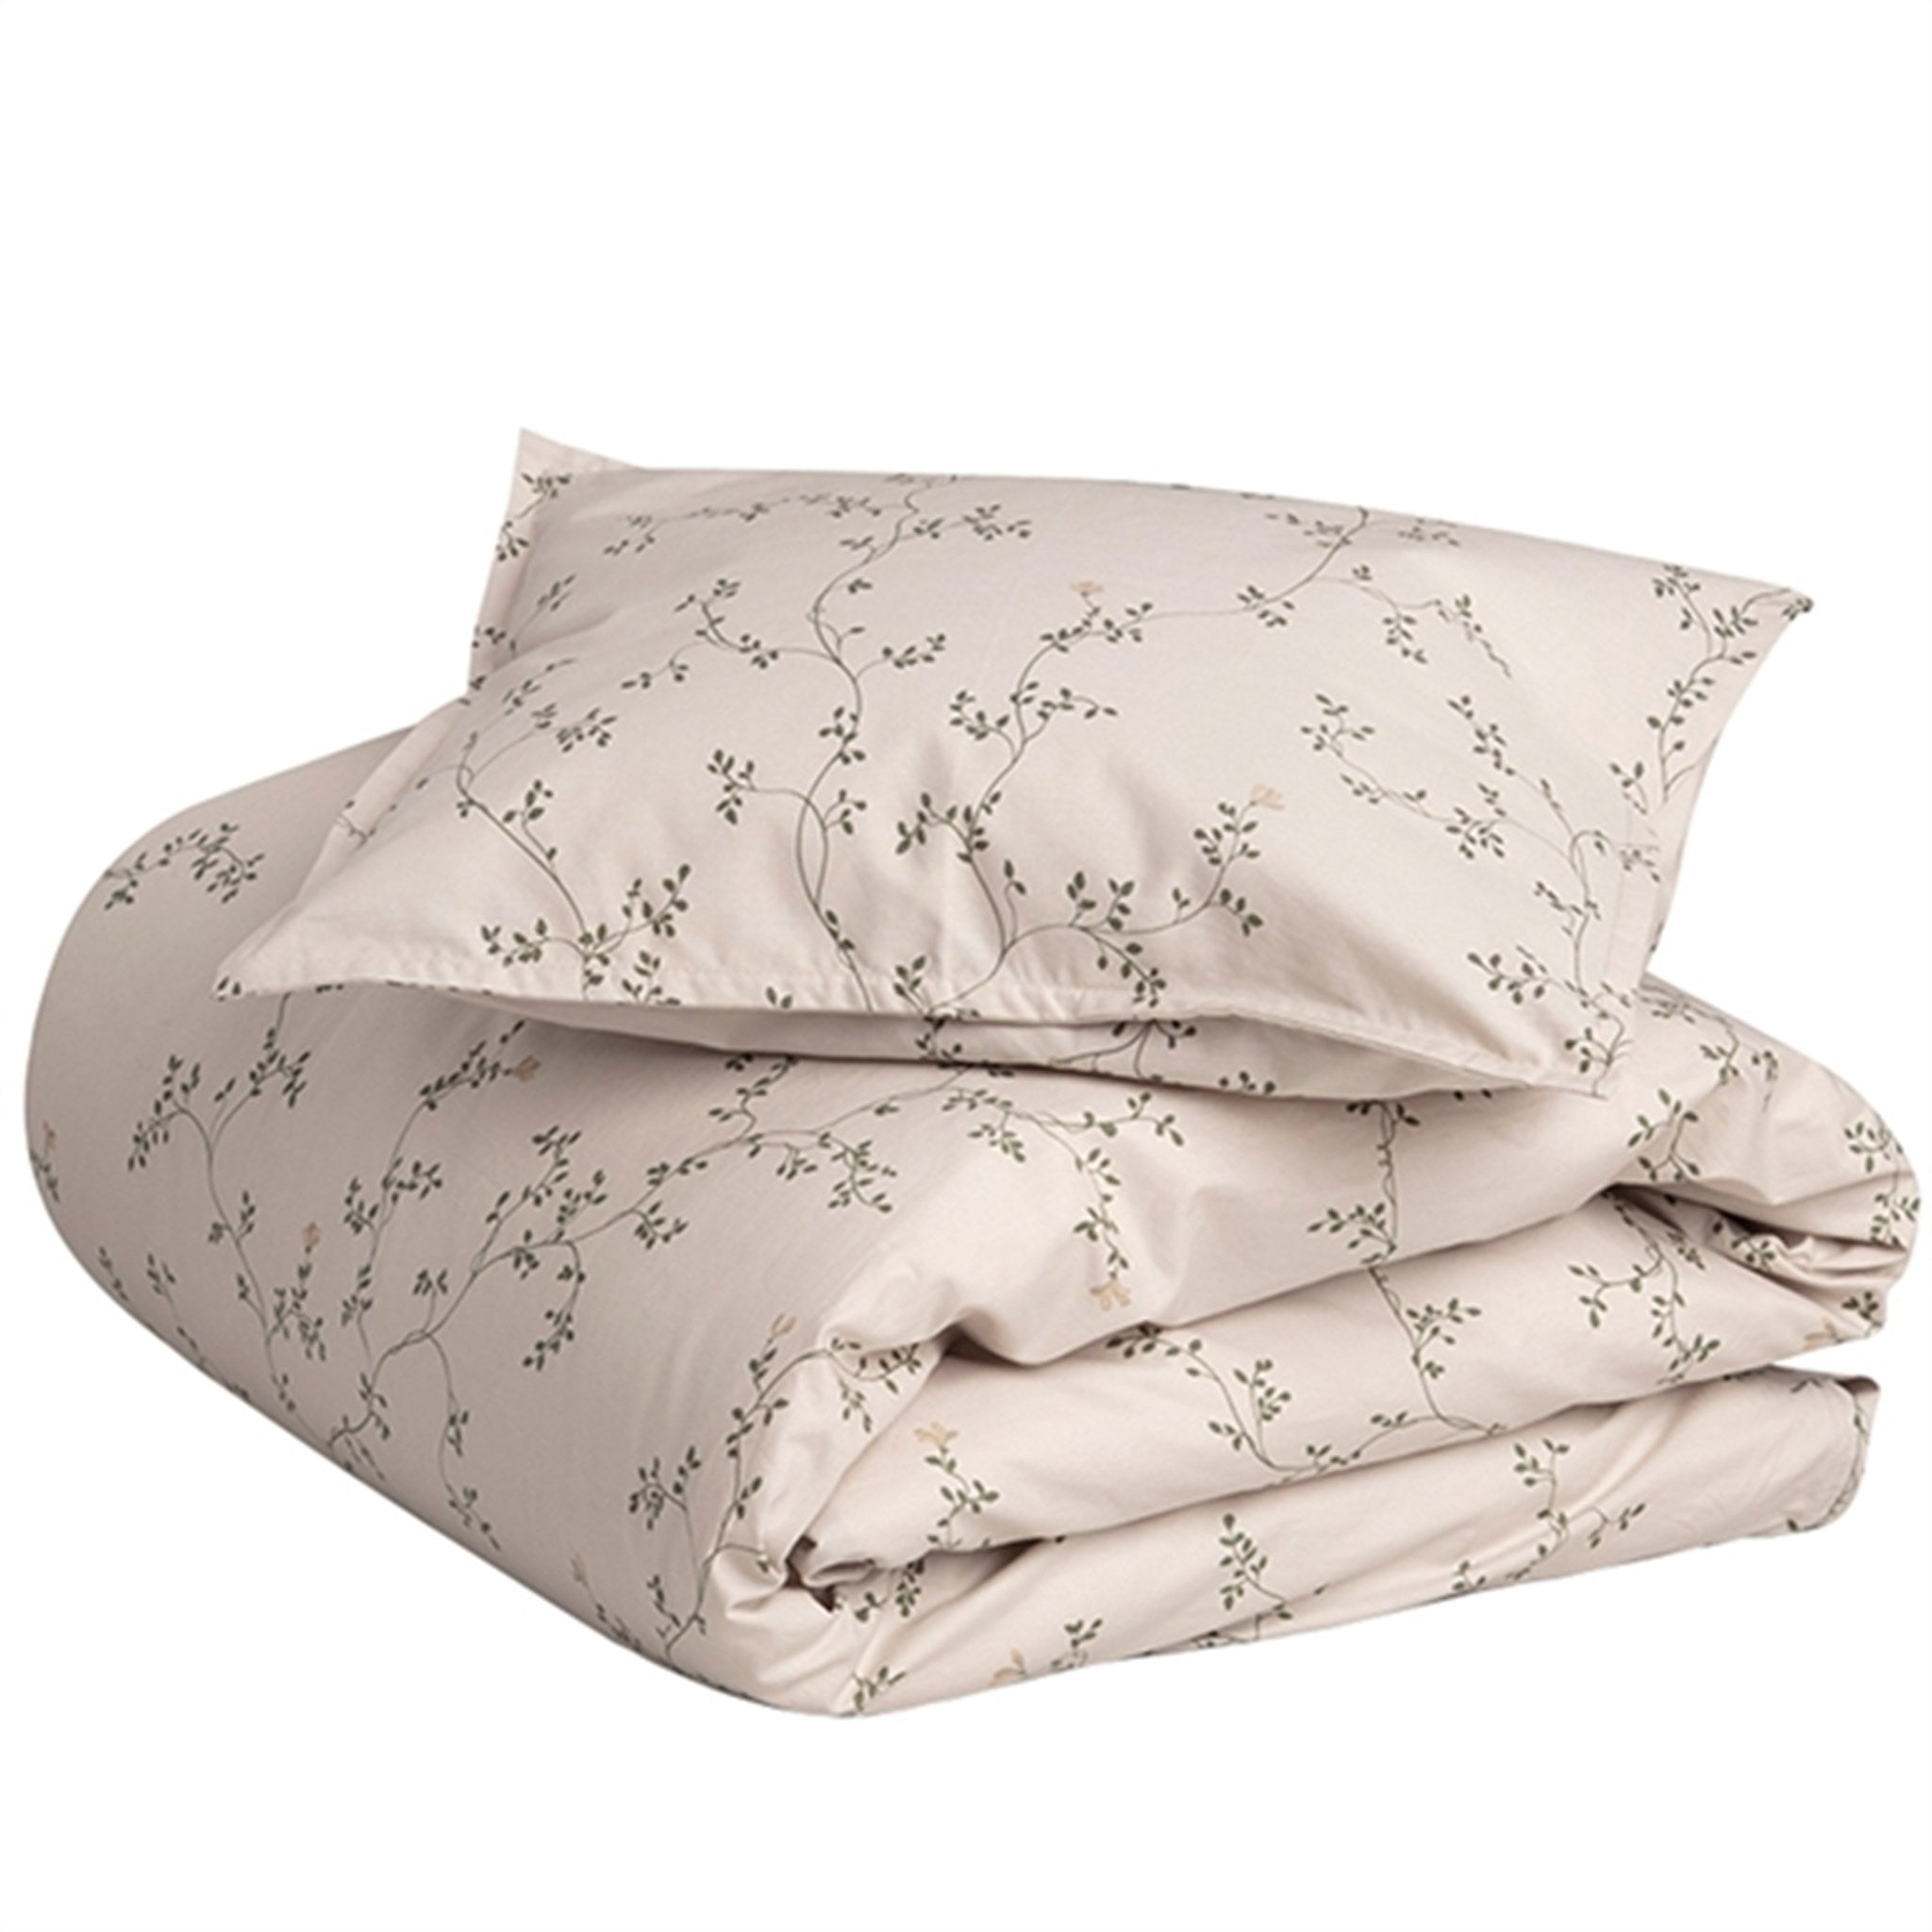 Garbo&Friends Percale Bedding Botany DK